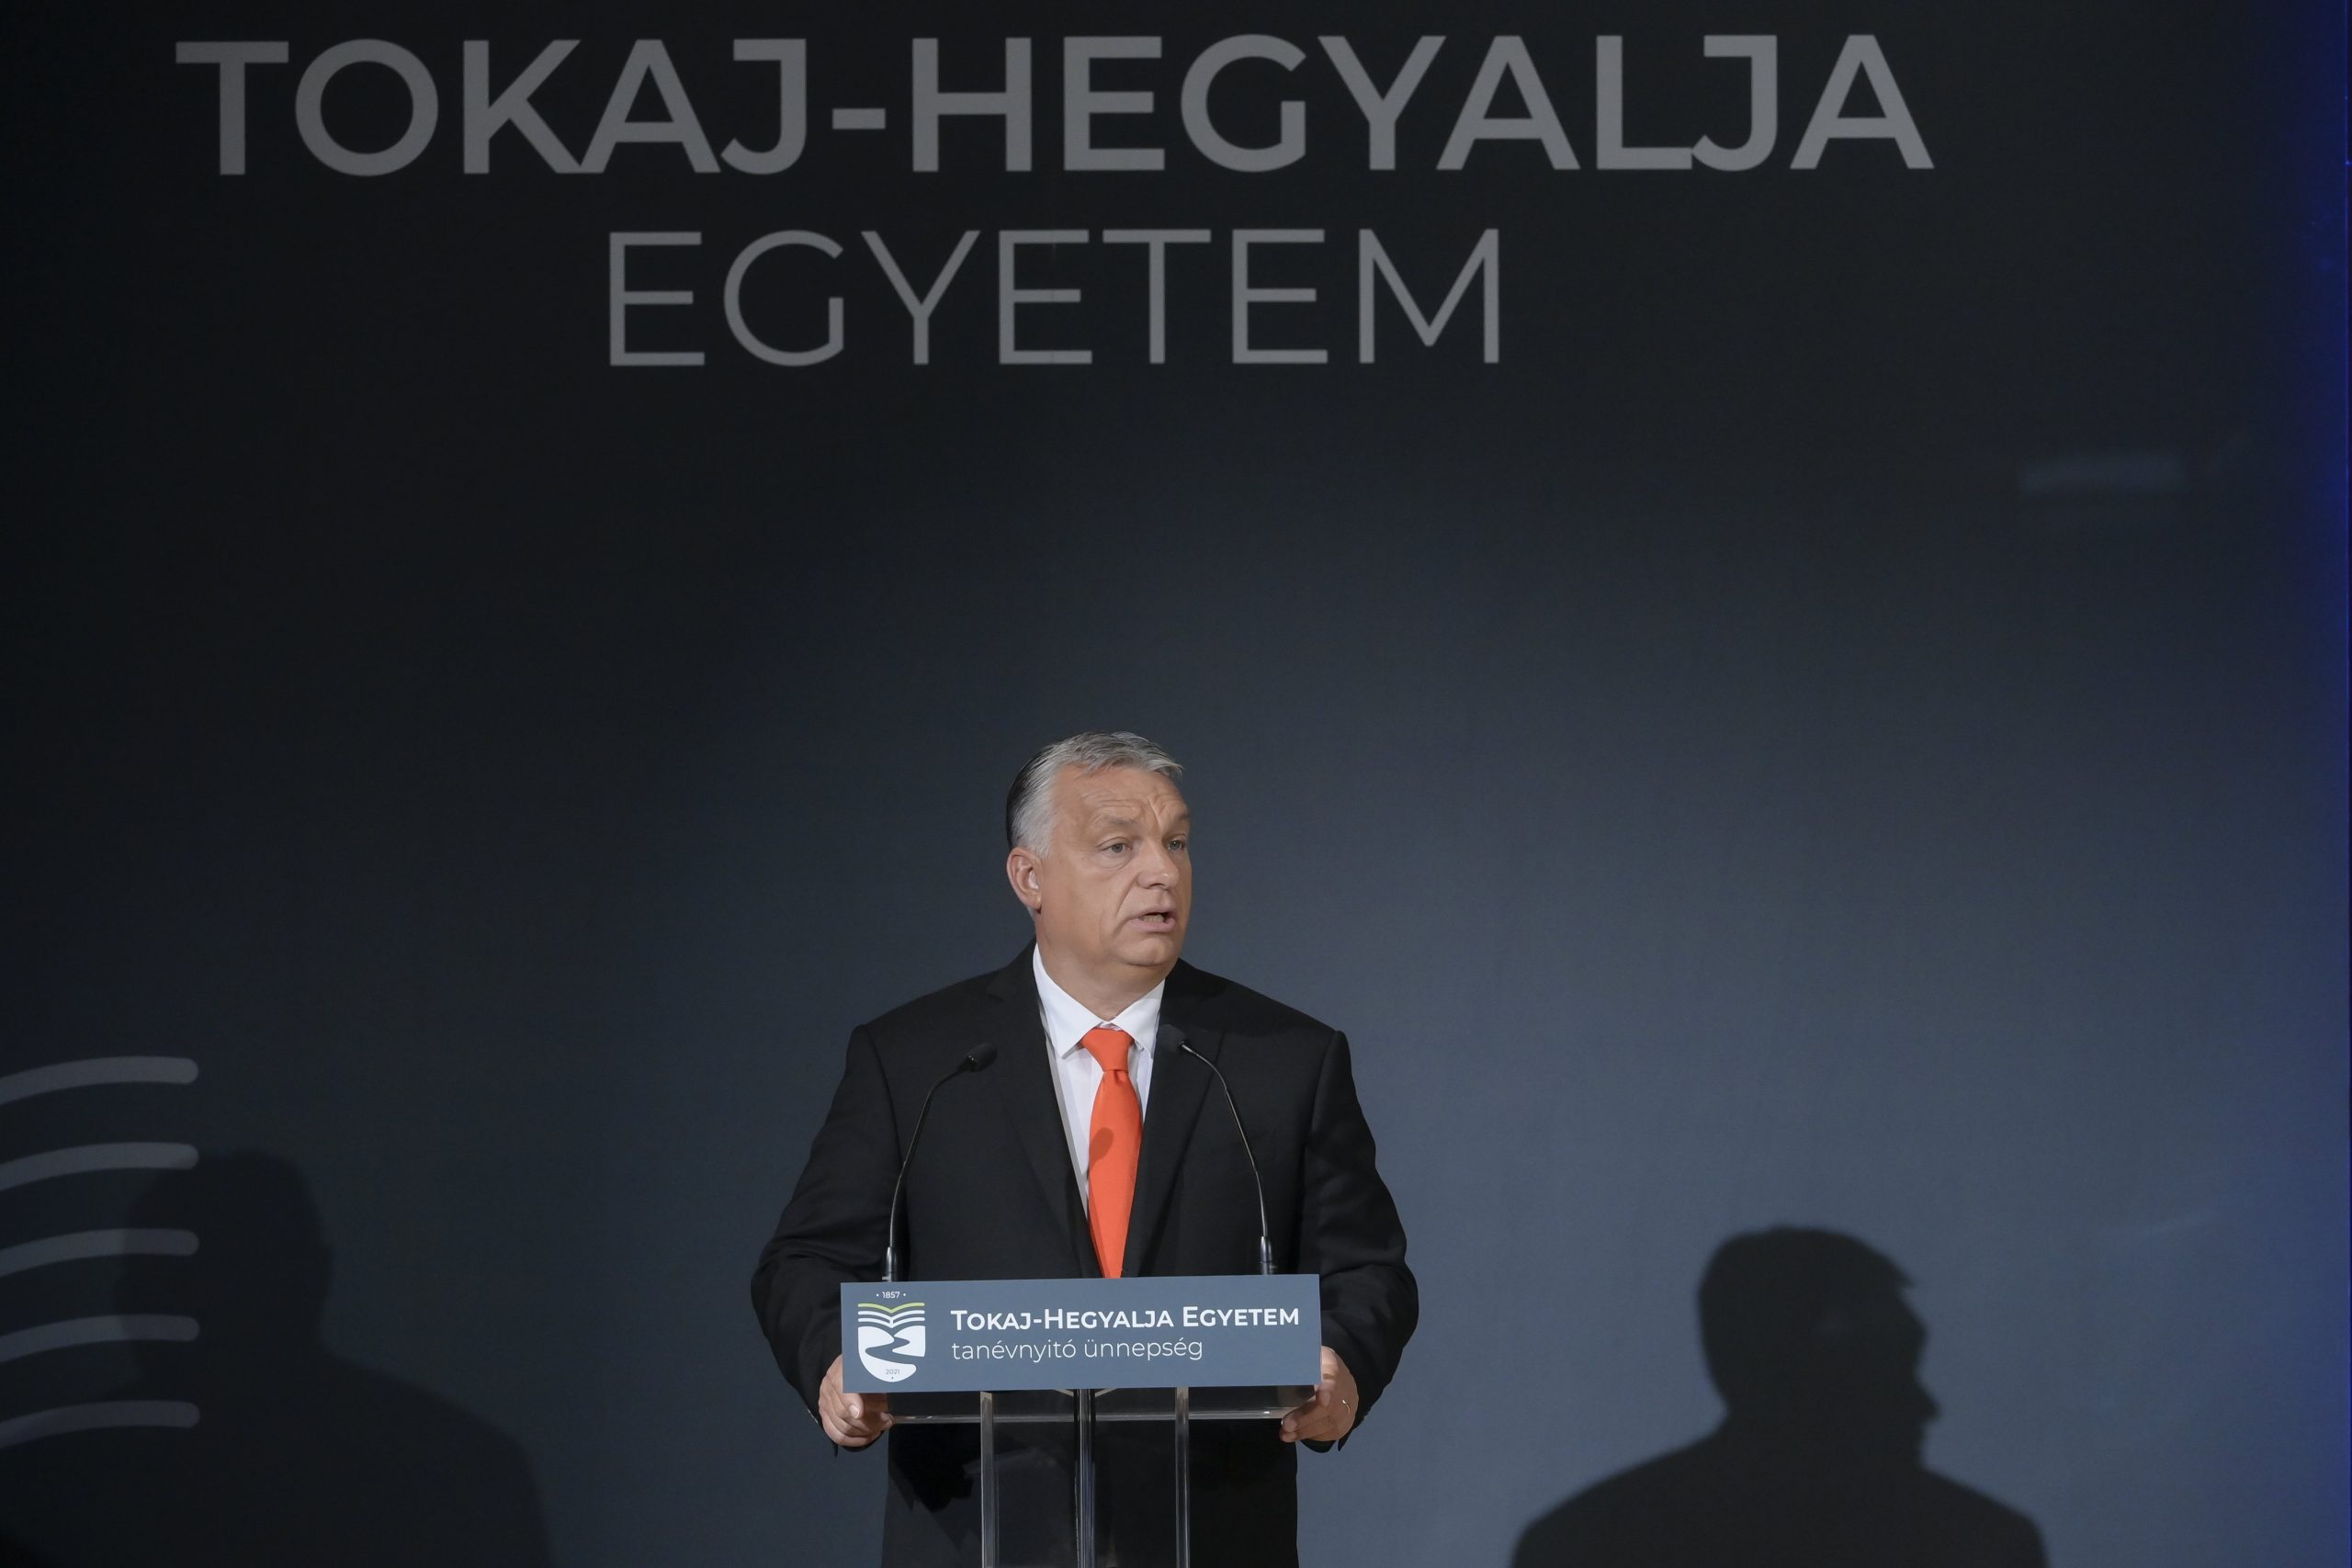 PM Orbán: 'Provinces Should Get What They Are Entitled to'